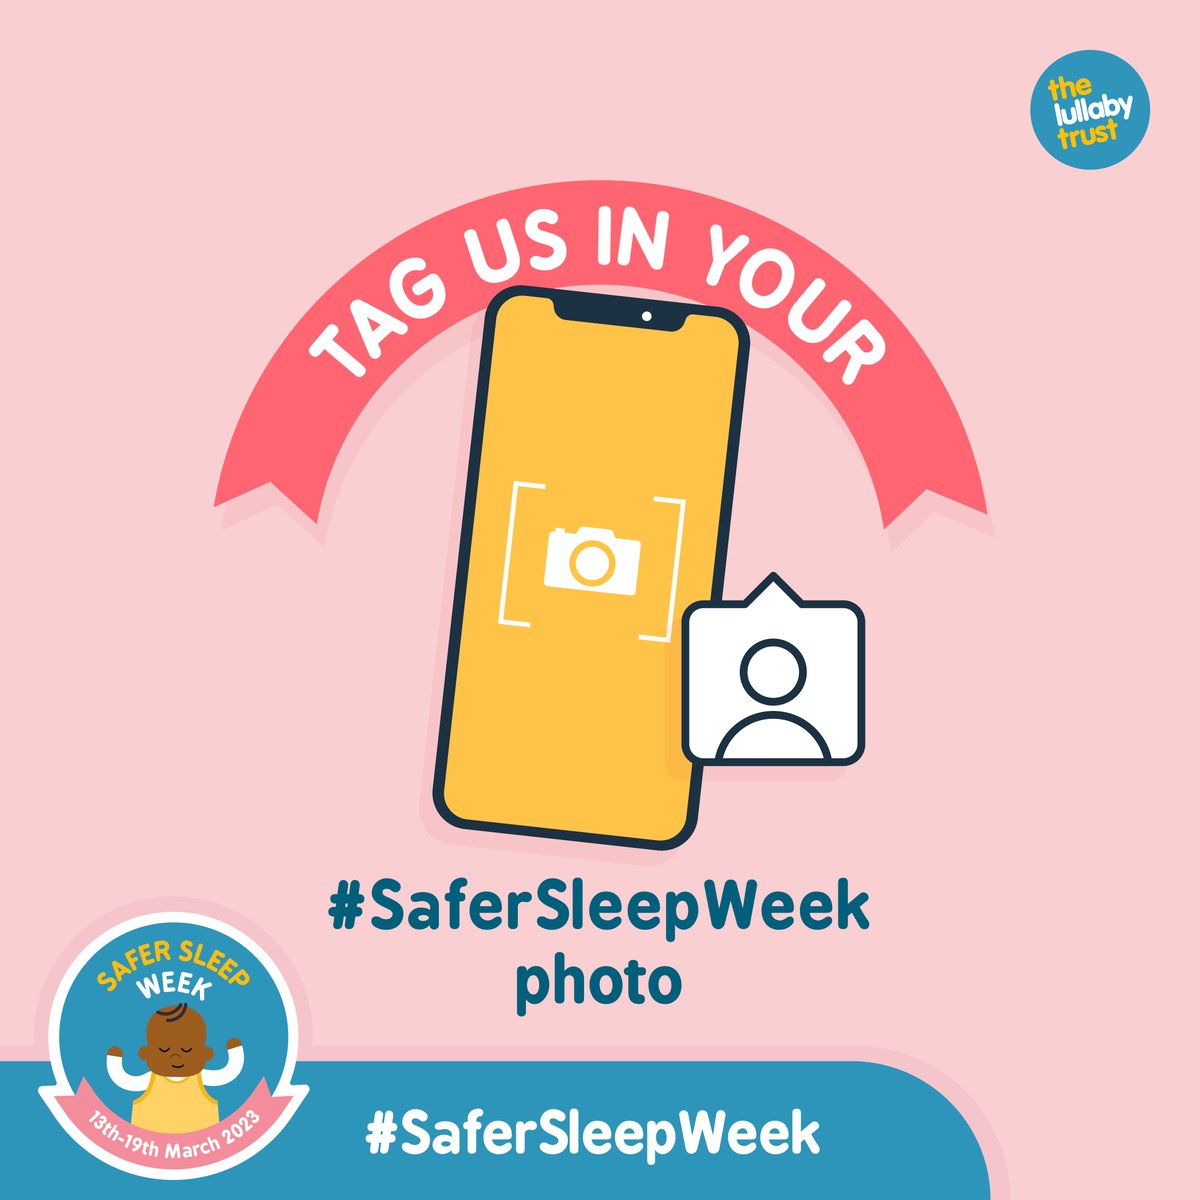 We’d love to see some photos of your #SaferSleepWeek poster displays and activities! Upload them to social media and then tag us so we can share them!